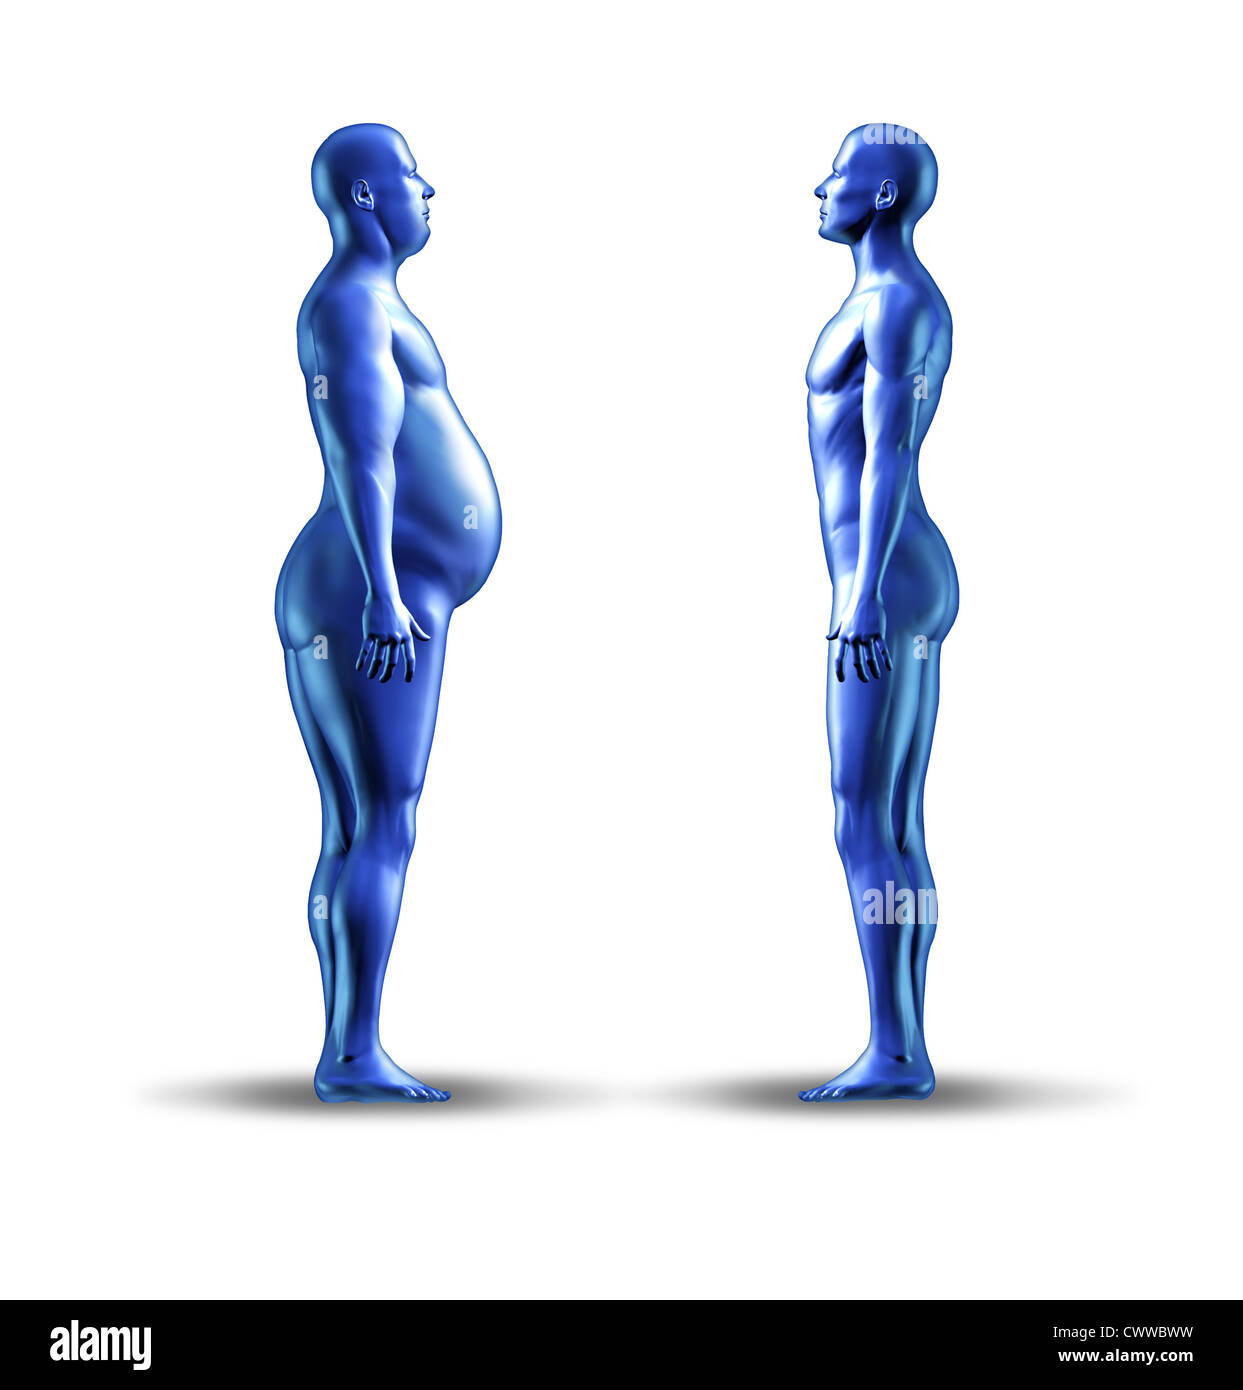 Losing weight symbol with an over weight man facing a normal fit human representing the concept of eating disorder and nutrition for a healthy lifestyle. Stock Photo